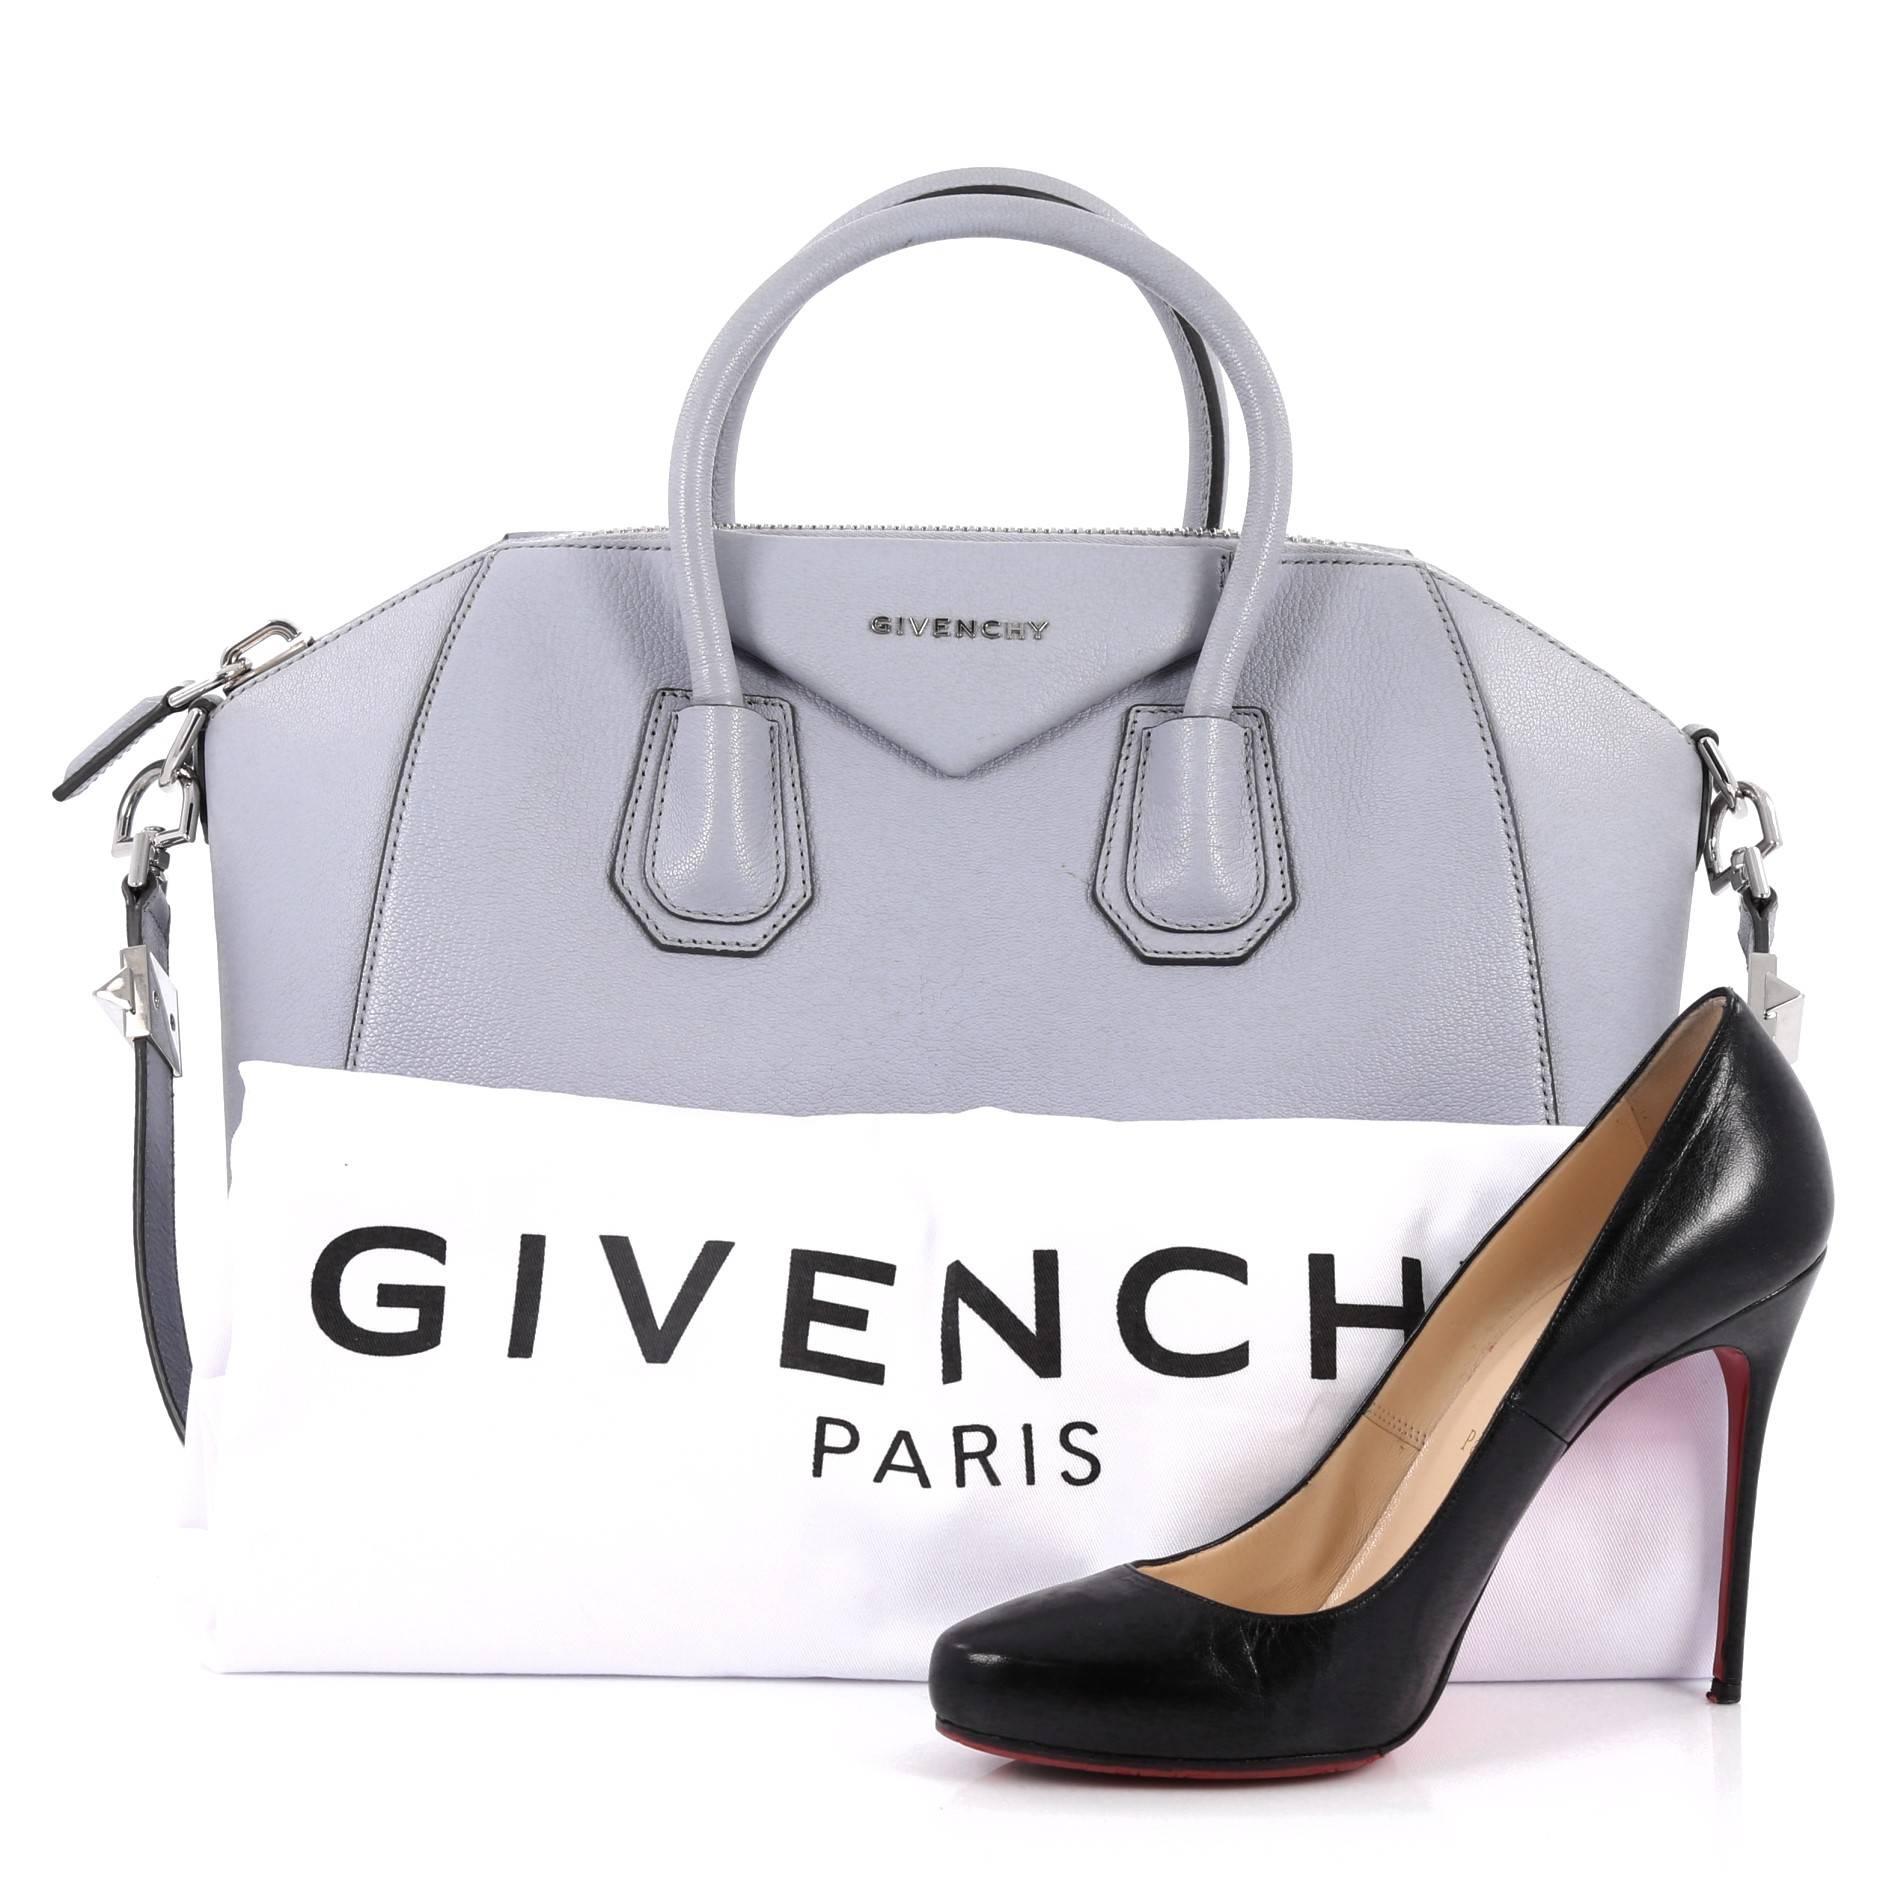 This authentic Givenchy Antigona Bag Leather Medium is a go-to fashion favorite. Crafted from periwinkle leather, this structured yet stylish tote features the brand's signature envelope flap detail with Givenchy logo, dual-rolled leather handles